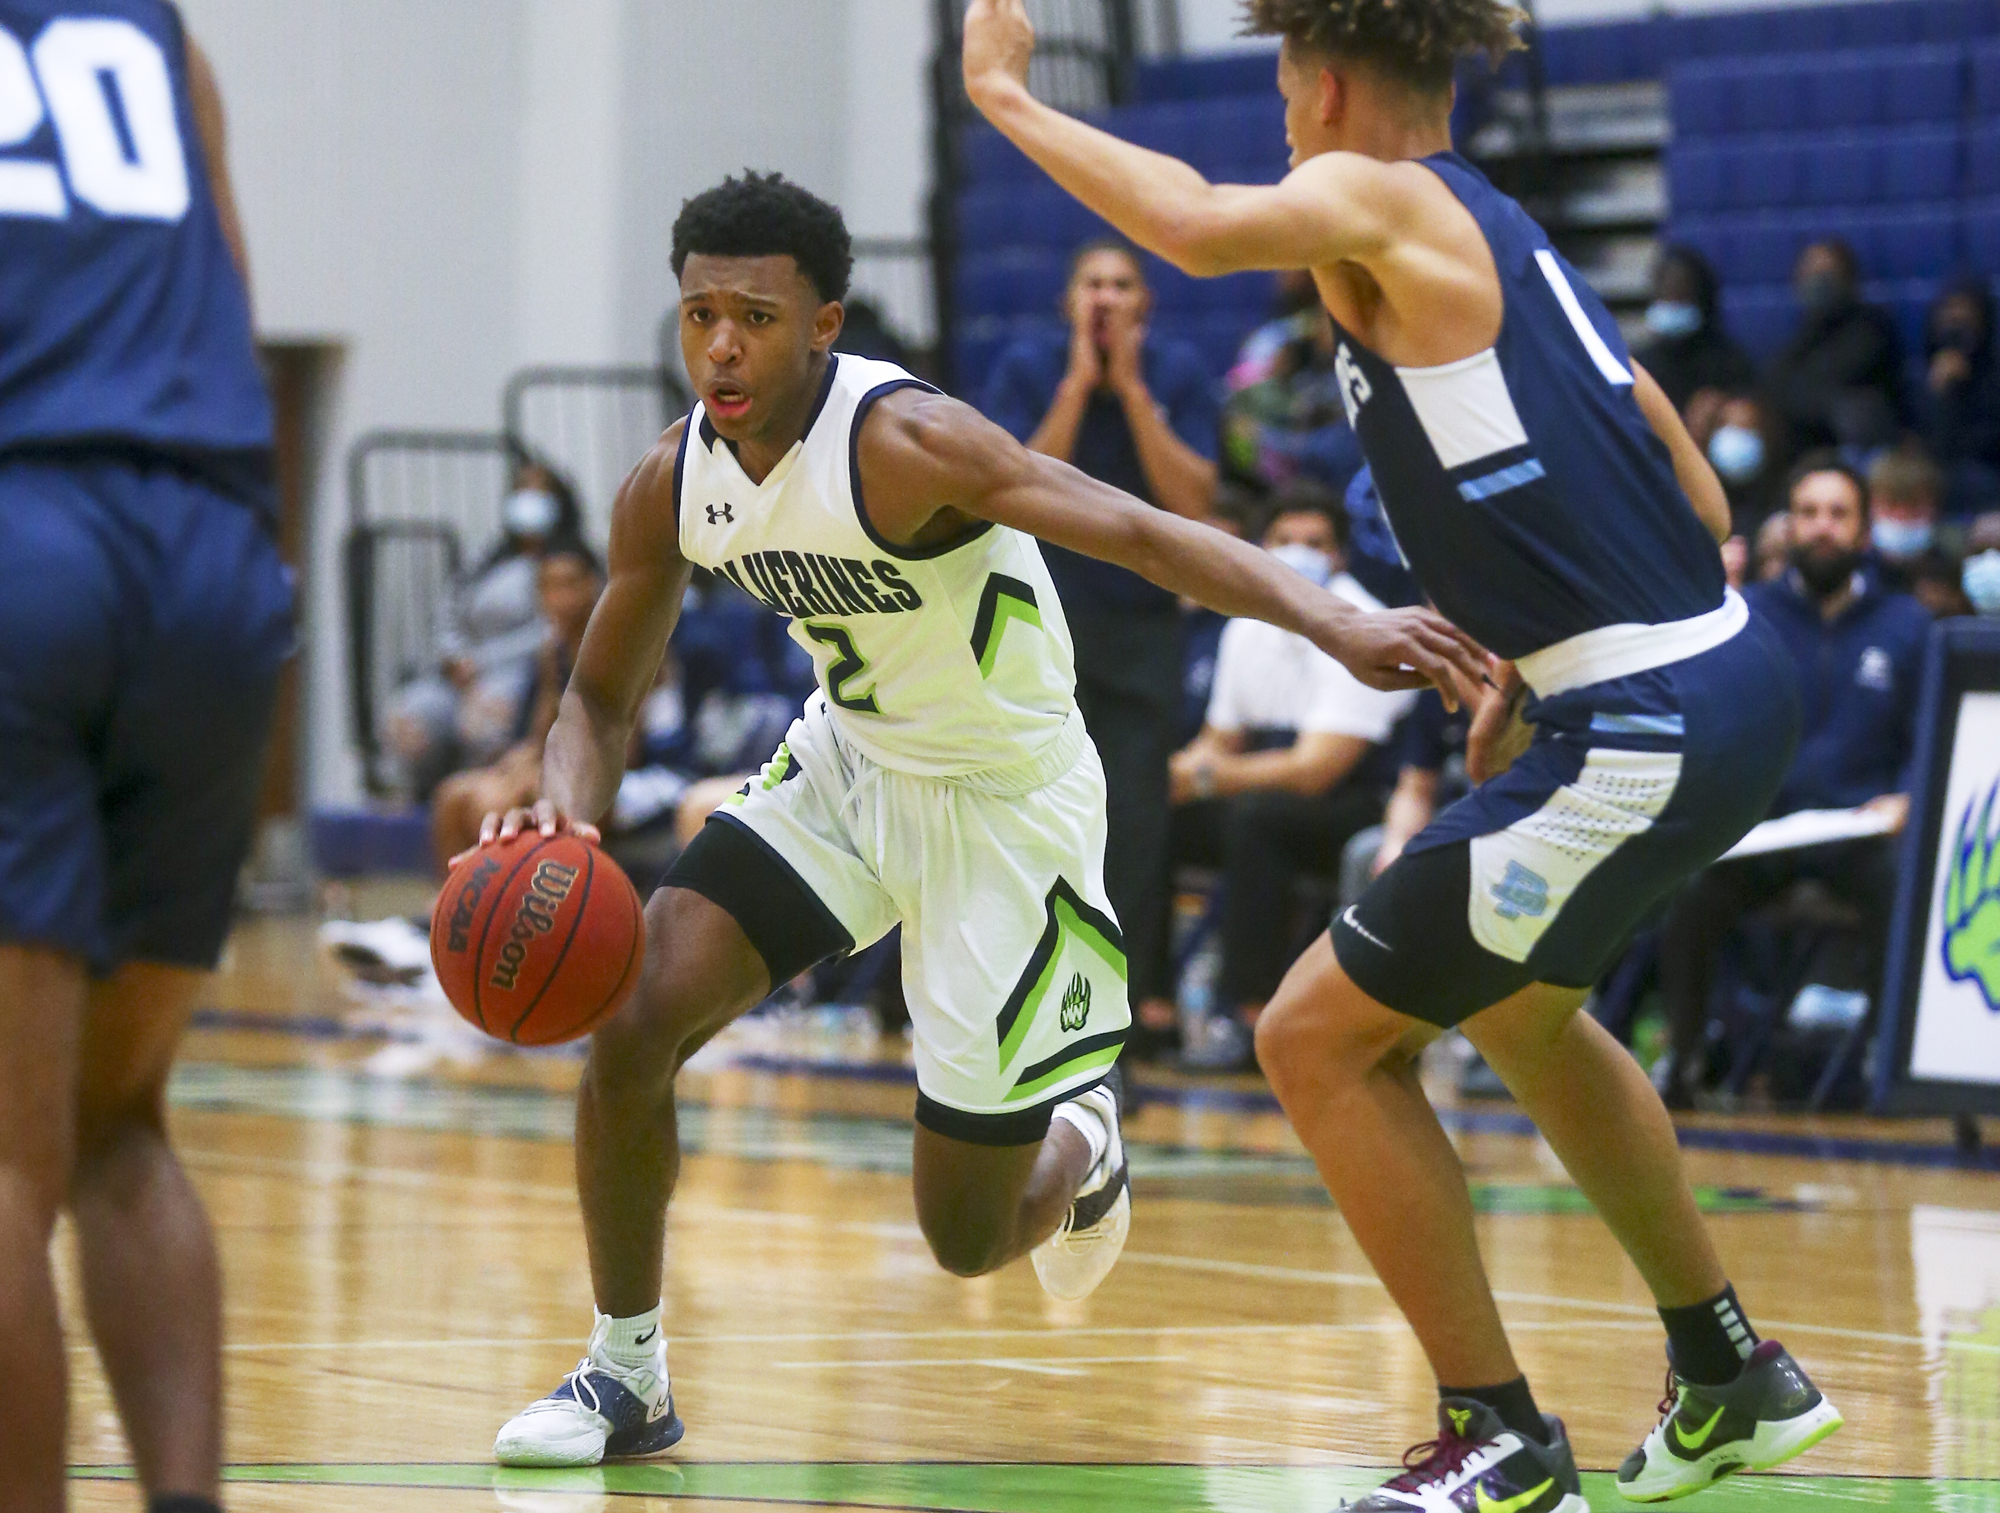 EXTRA: Windermere senior Kanye Jones also recorded the 1,000th point of his high school career in a win against Apopka back on Tuesday, Jan. 26.